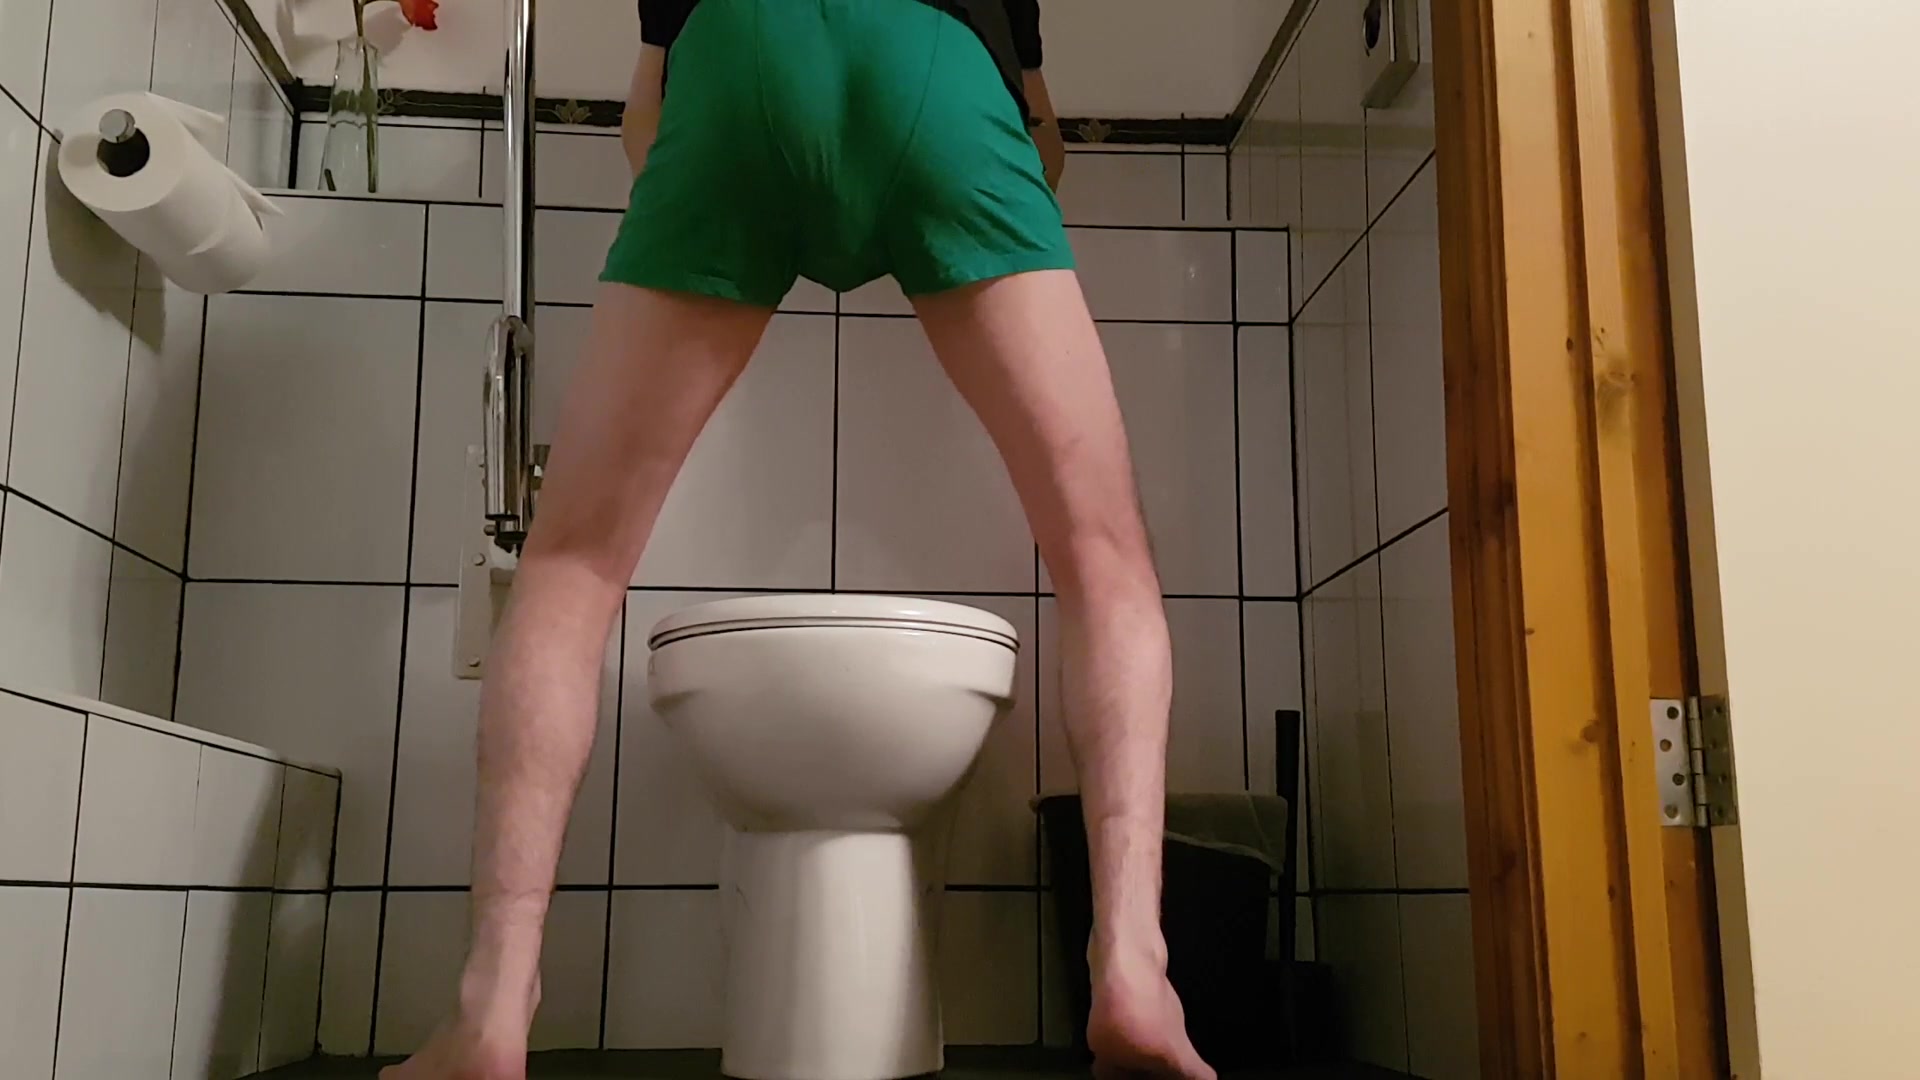 Pooping Green Boxers And Sitting